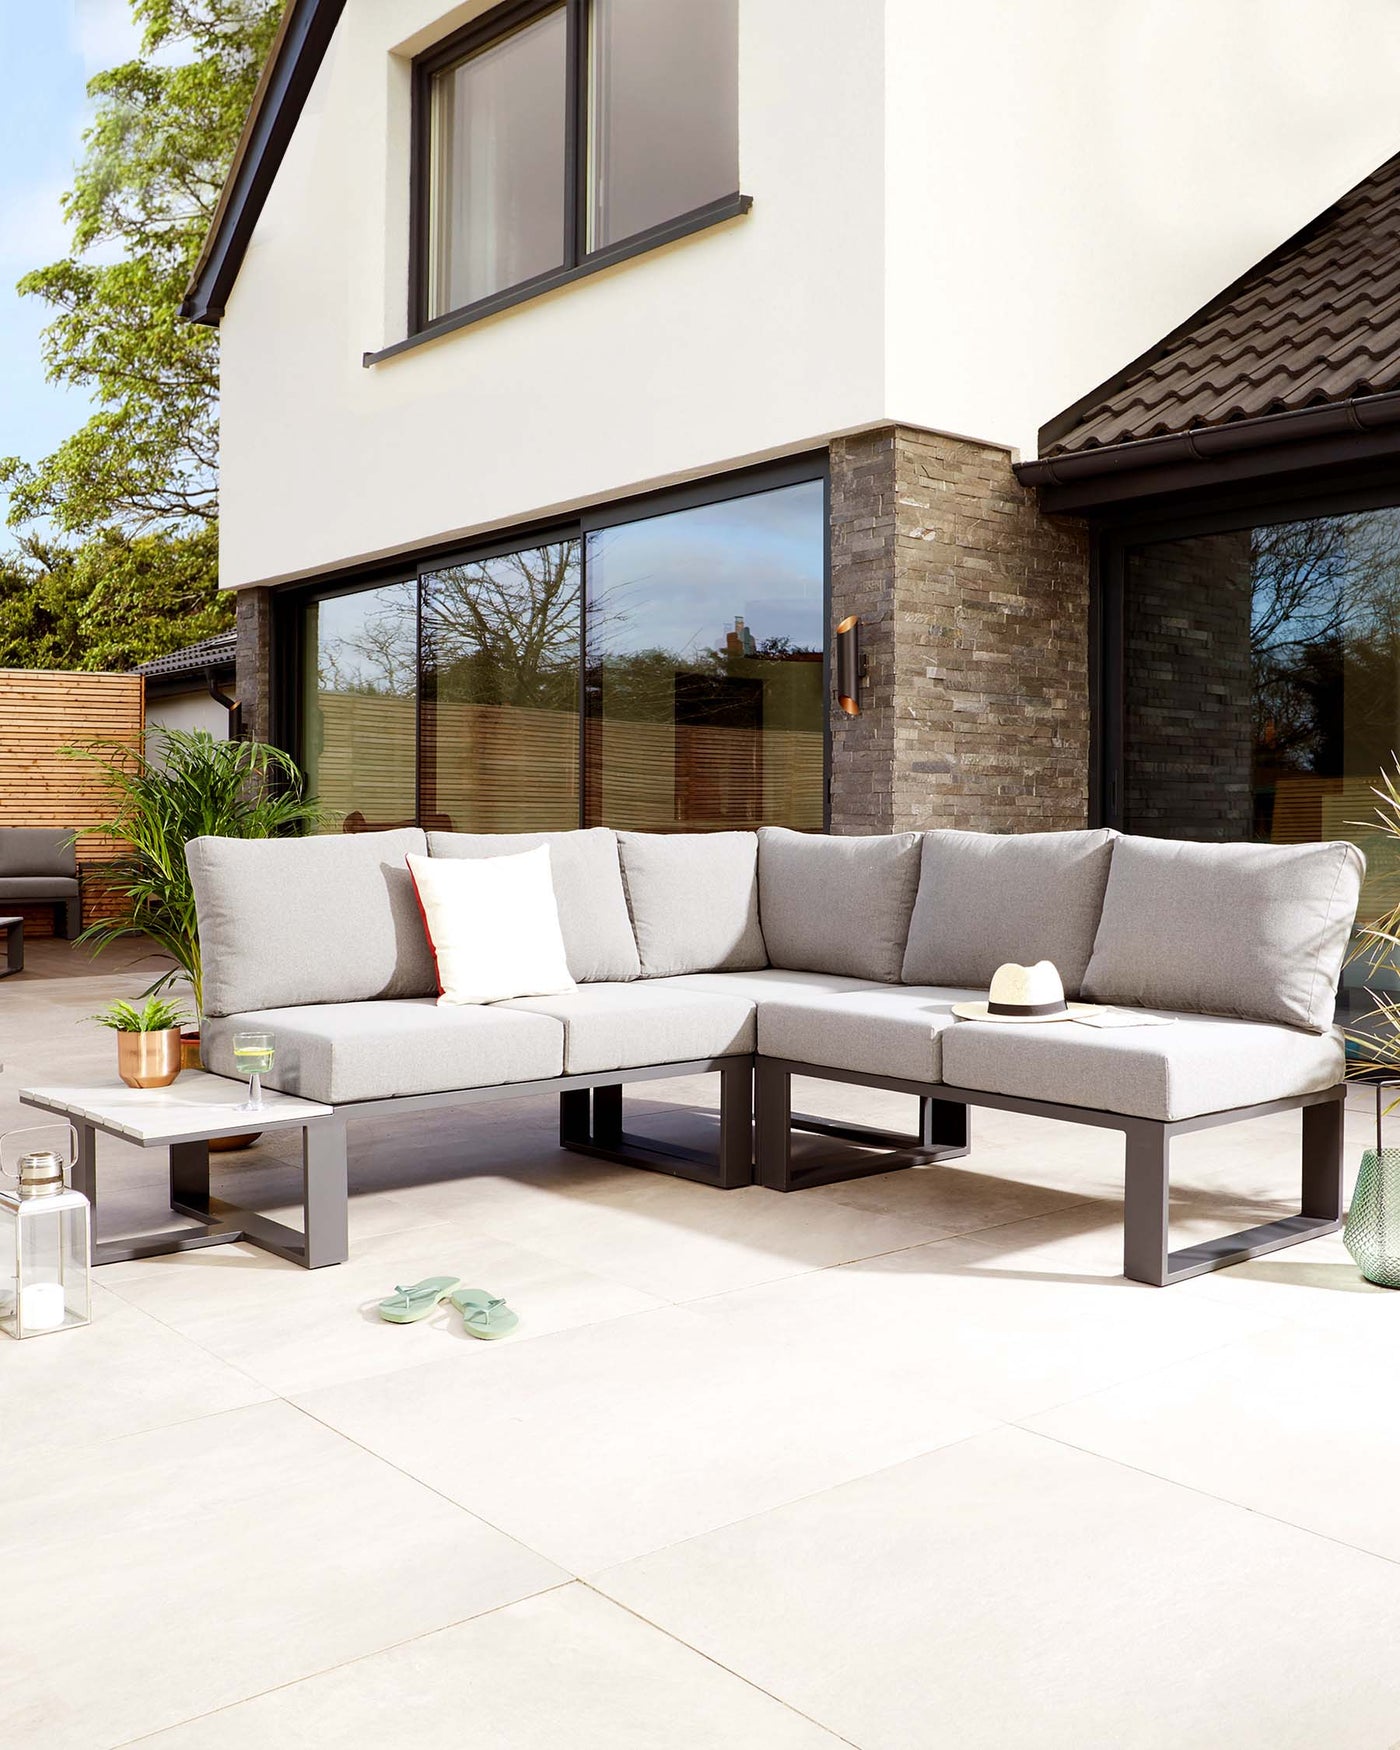 Modern outdoor L-shaped sectional sofa with light grey cushions on a minimalist dark frame, paired with a rectangular, low profile coffee table in a matching colour scheme.